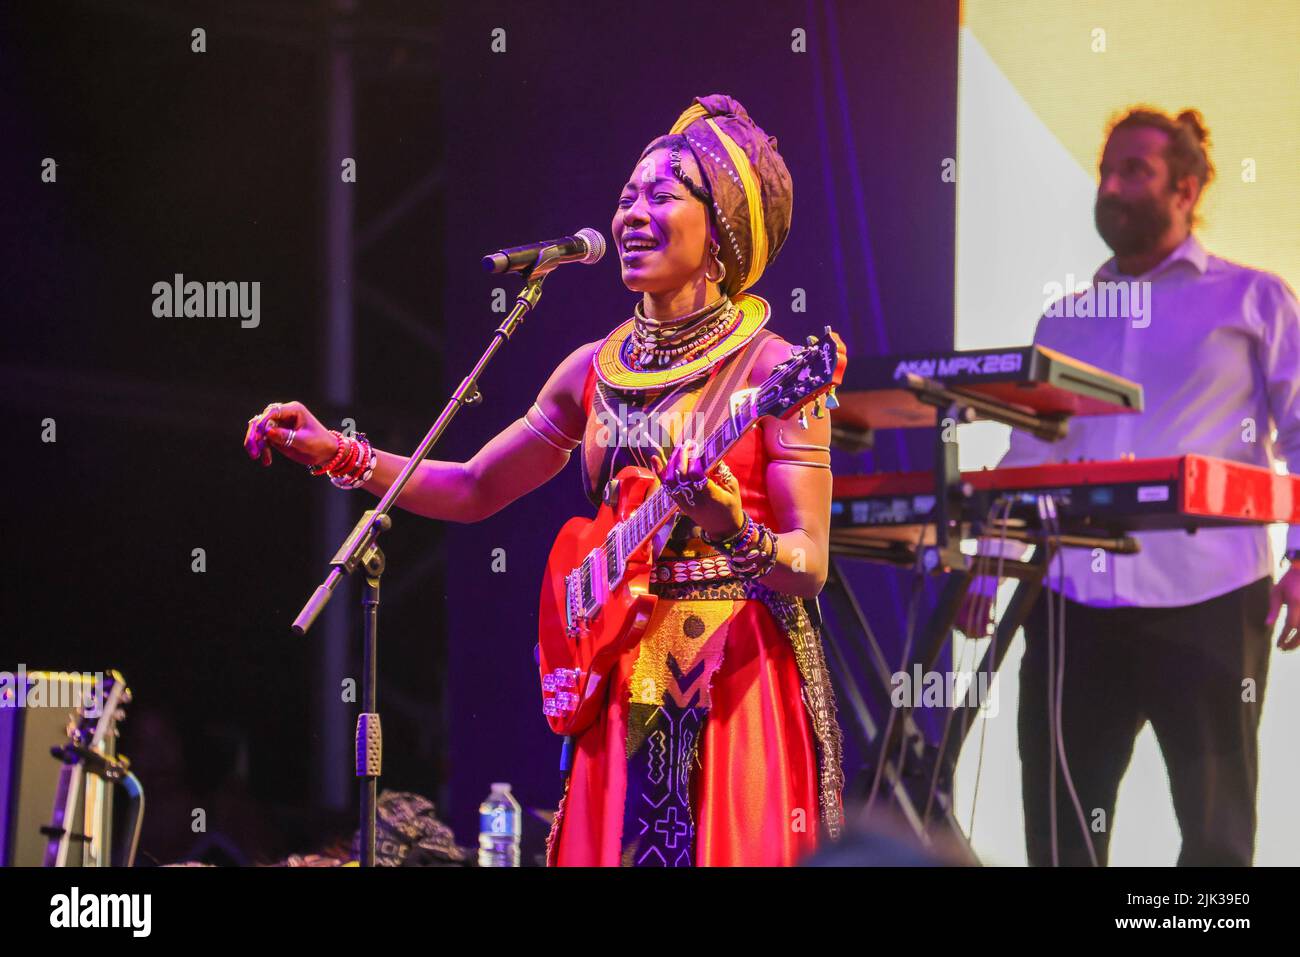 Wiltshire, UK. 29th July, 2022. 30th July 2022, Womad Festival, Charlton Park, Malmesbury, Wiltshire. Fatoumata Diawara performs traditional and modern mix of Malian songs on the Open Air stage.  The WOMAD Festival held its first event in 1982 at the Bath and West Showground in Shepton Mallet, Somerset. Over the intervening 40 years, the Peter Gabriel fronted organisation has hosted festivals across the globe, from Spain to New Zealand, Chile to Abu Dhabi. For the 40th anniversary its flagship UK festival is held this weekend from 28-30 July at Charlton Park. WOMAD - World of Music, Arts and D Stock Photo